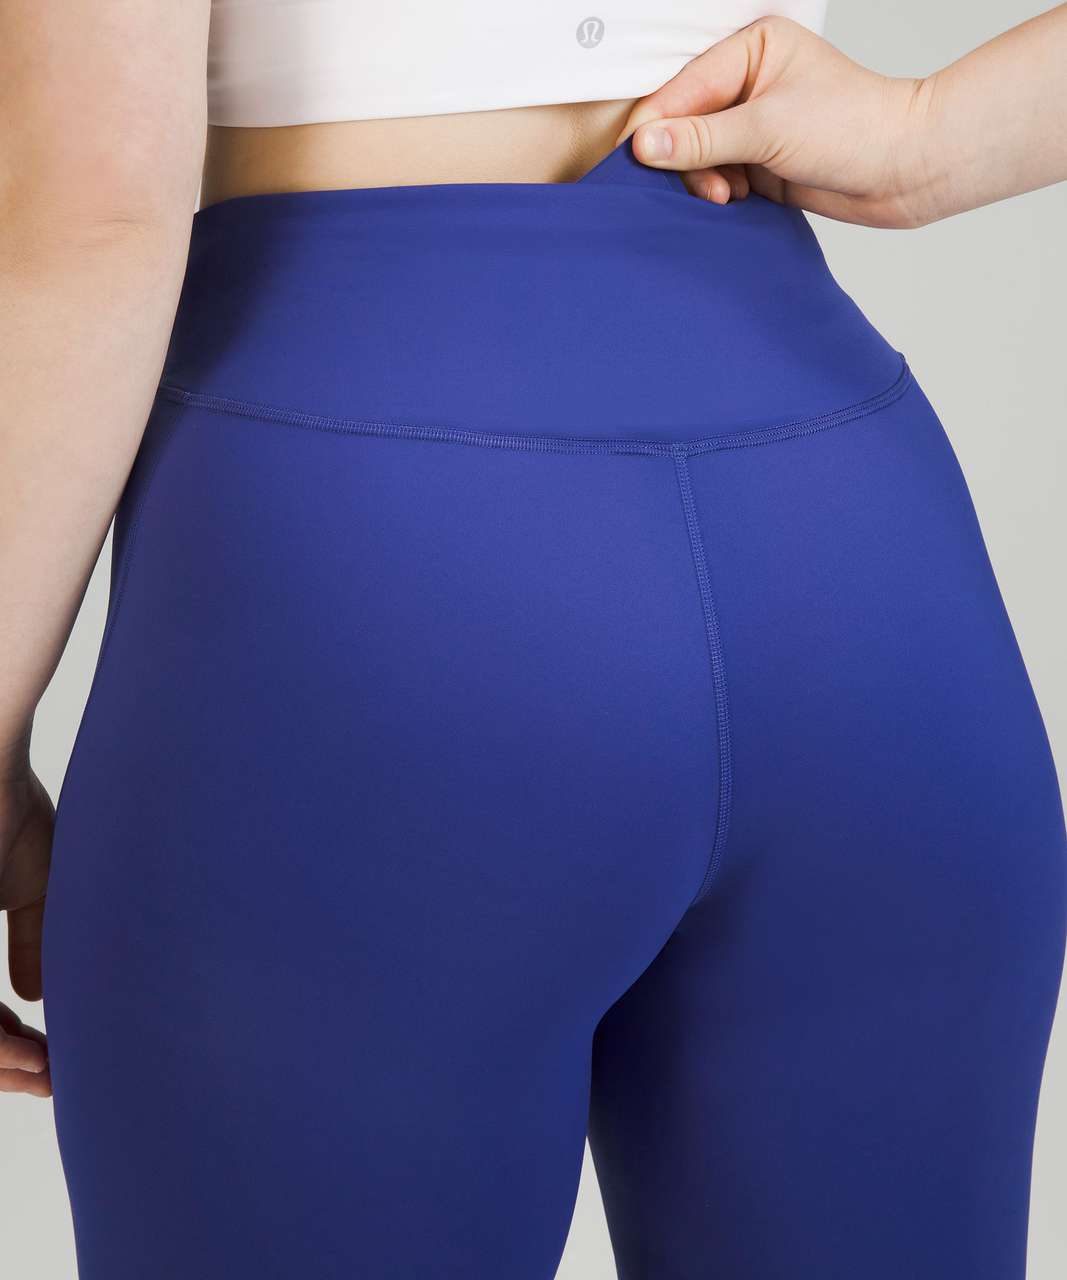 Lululemon Base Pace High-Rise Running Tight 28" - Psychic